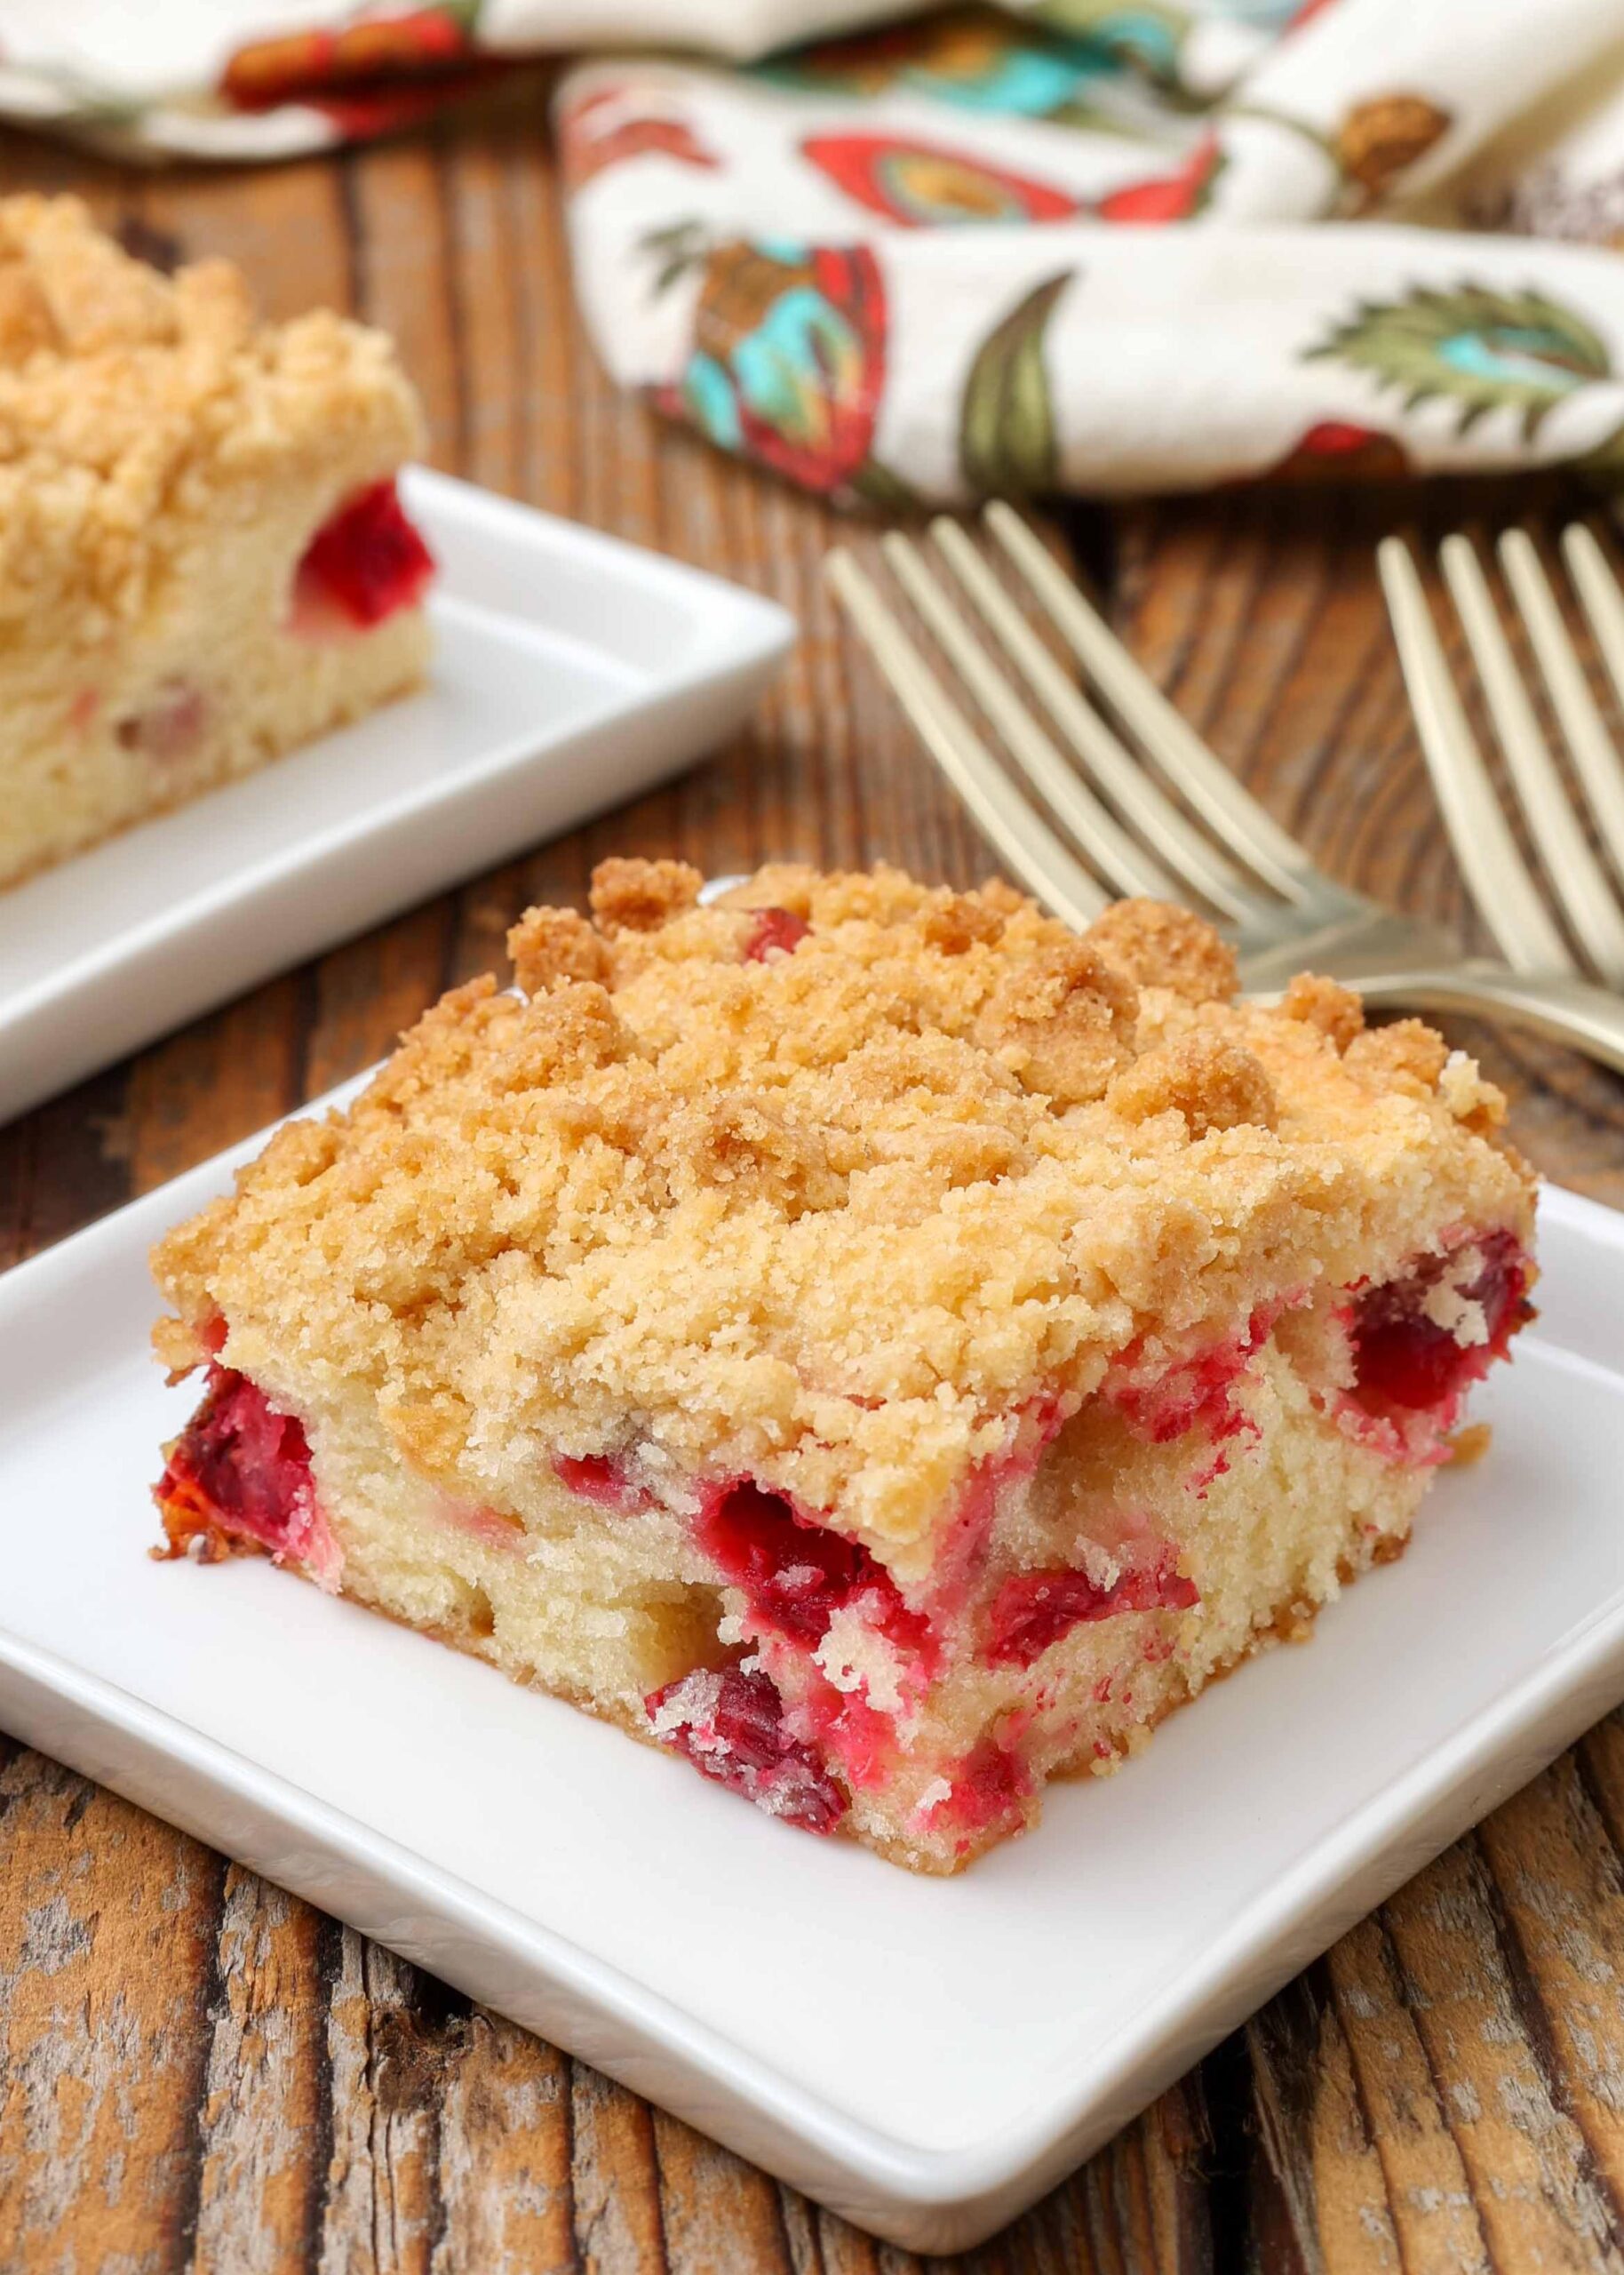  The streusel topping adds a delicious crunch to this cake